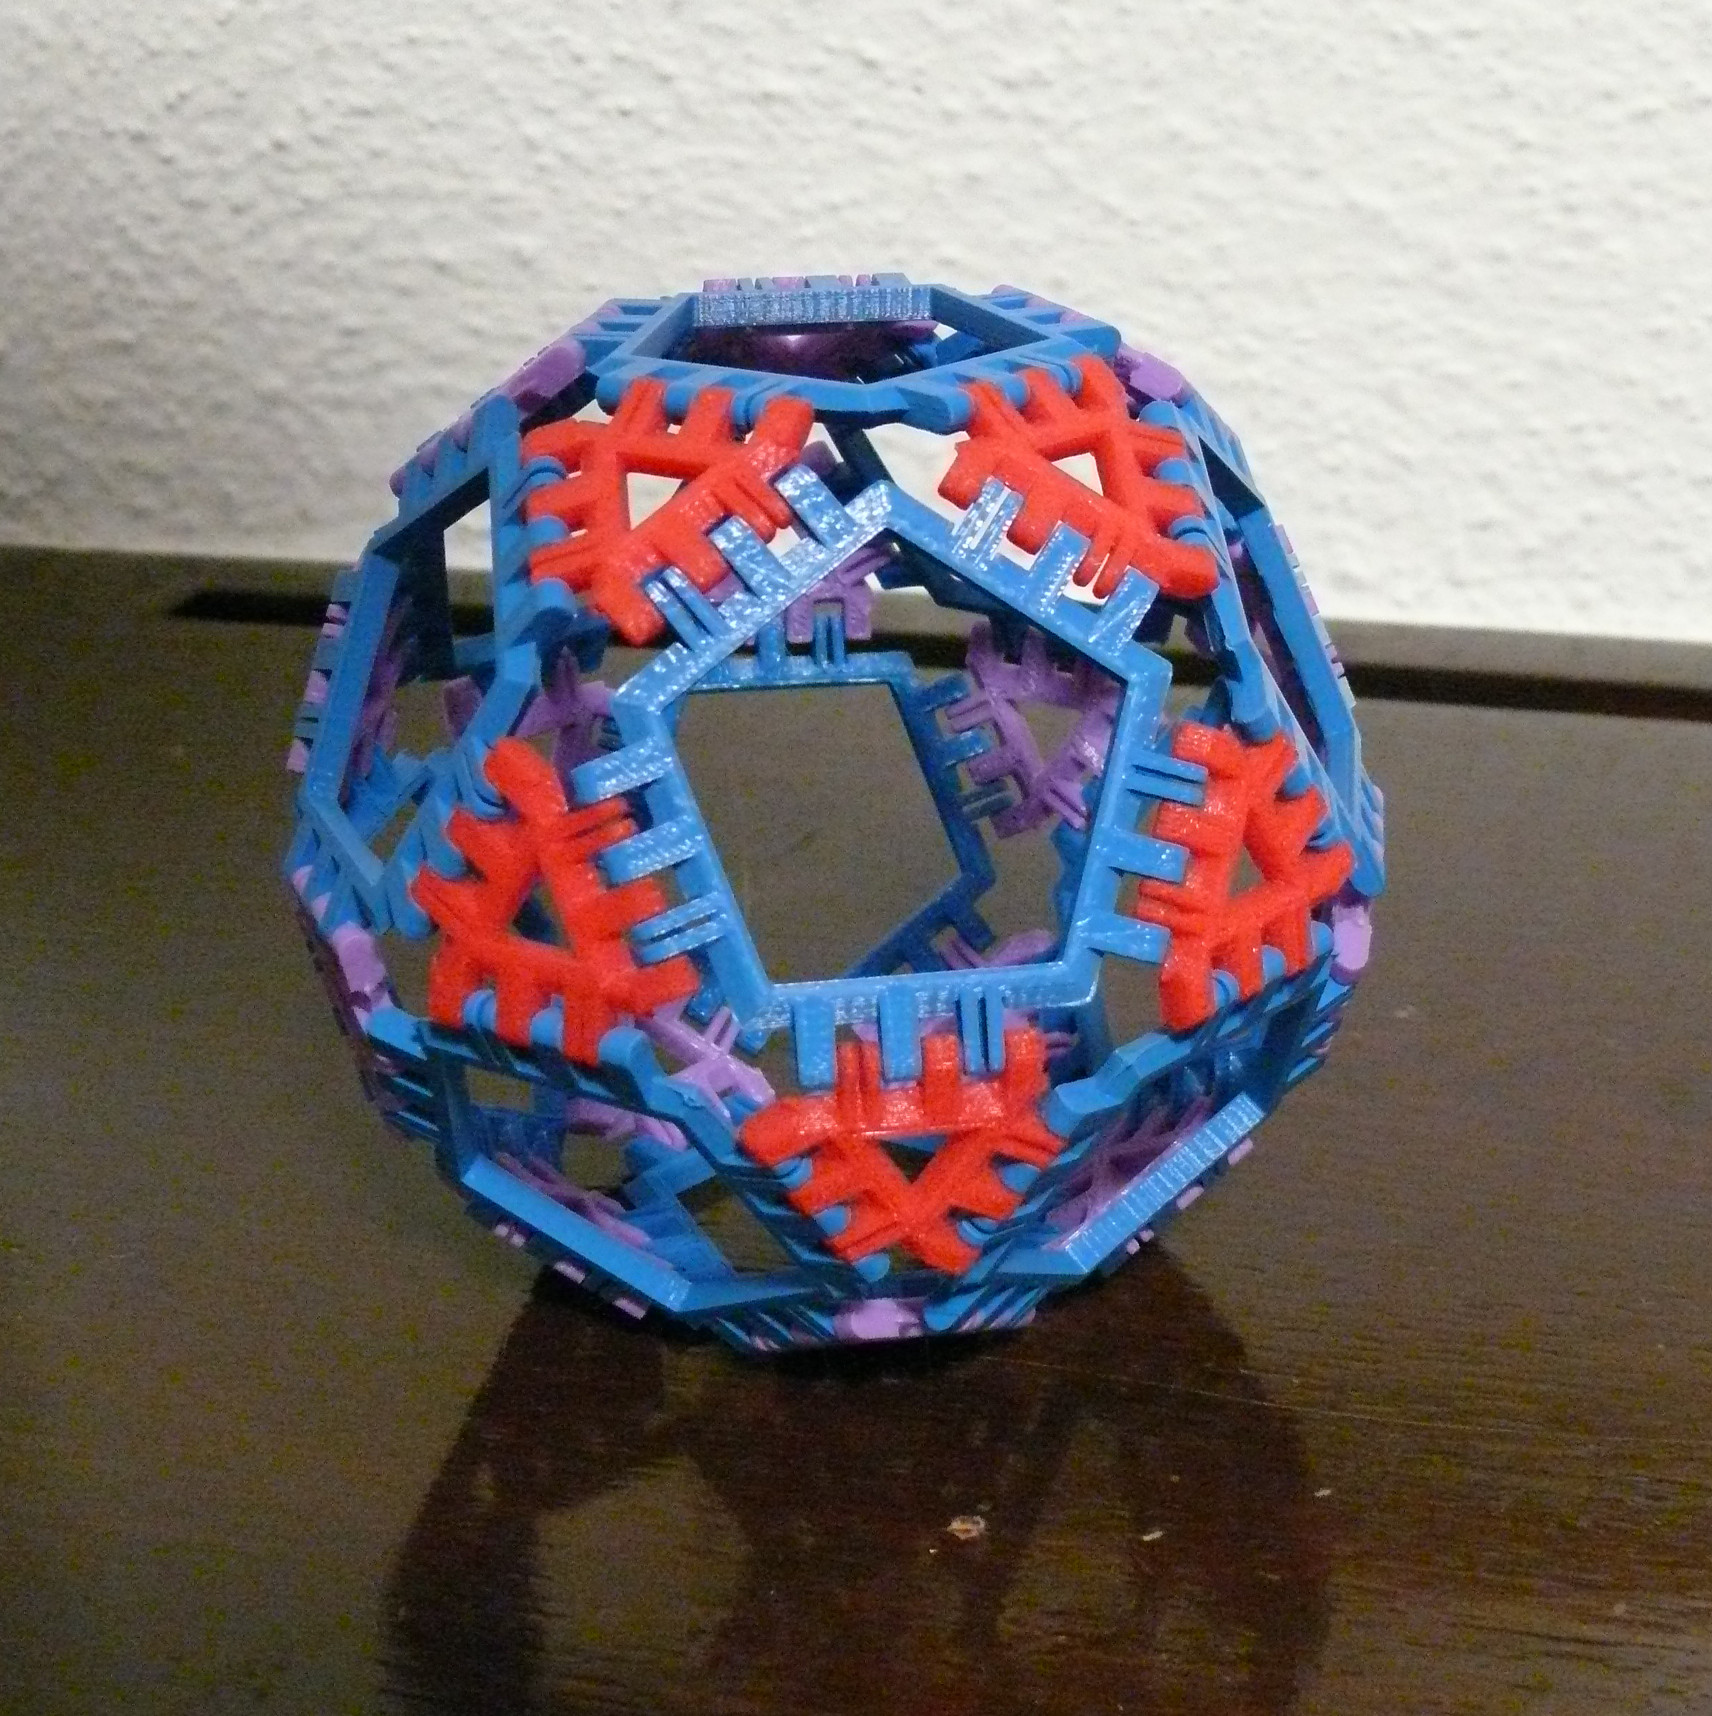 Cover image for article 'Icosidodecahedron'